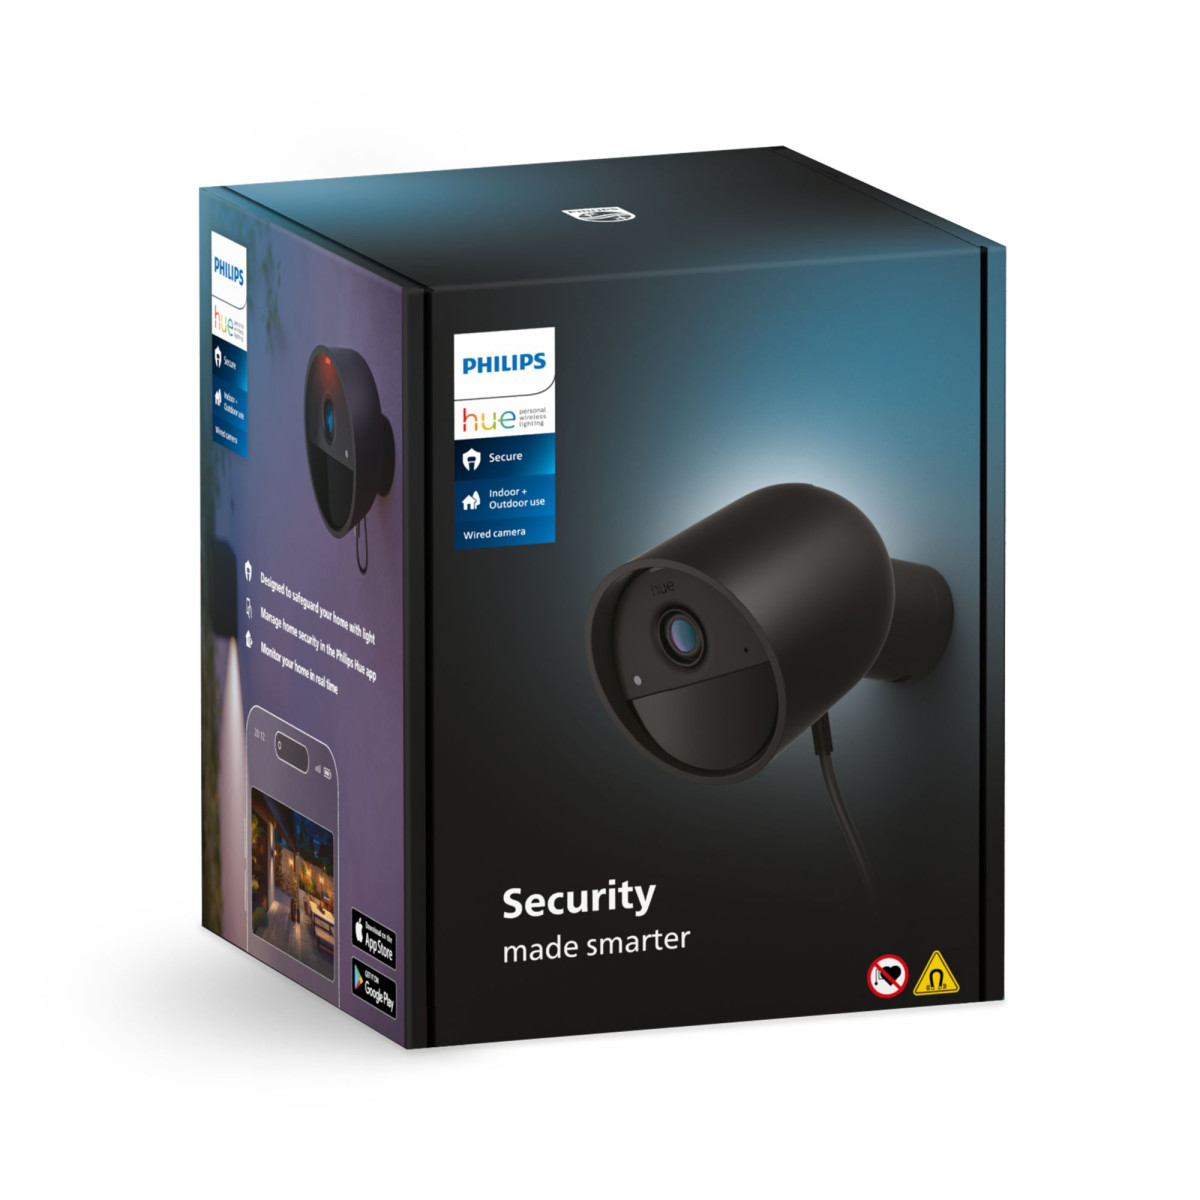 Secure Wired Camera